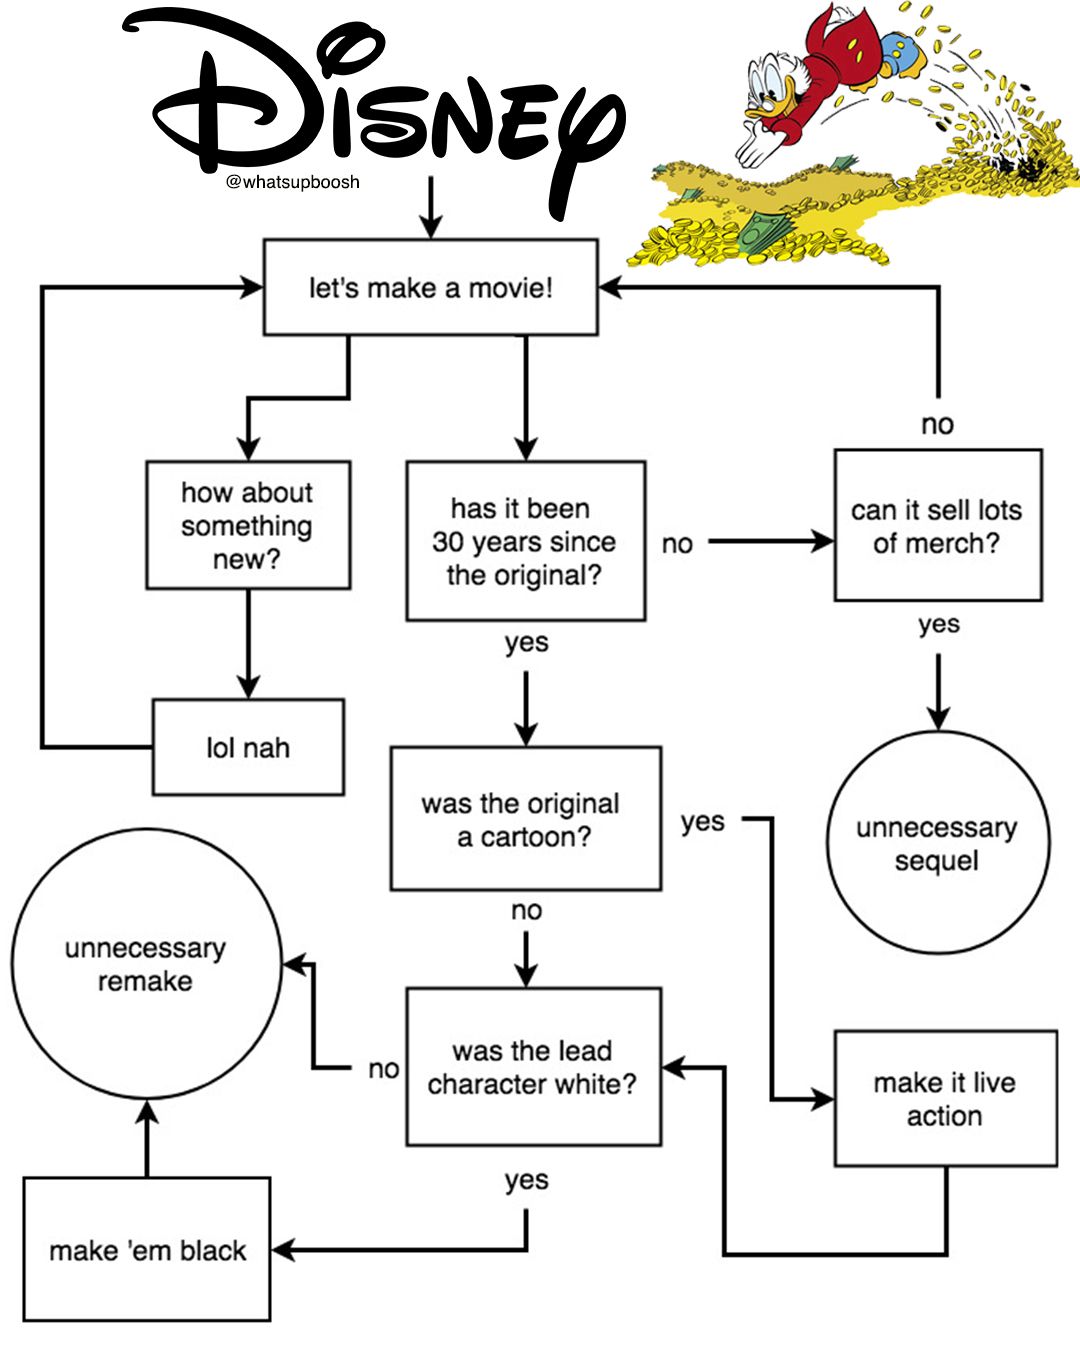 how to make movies the disney way